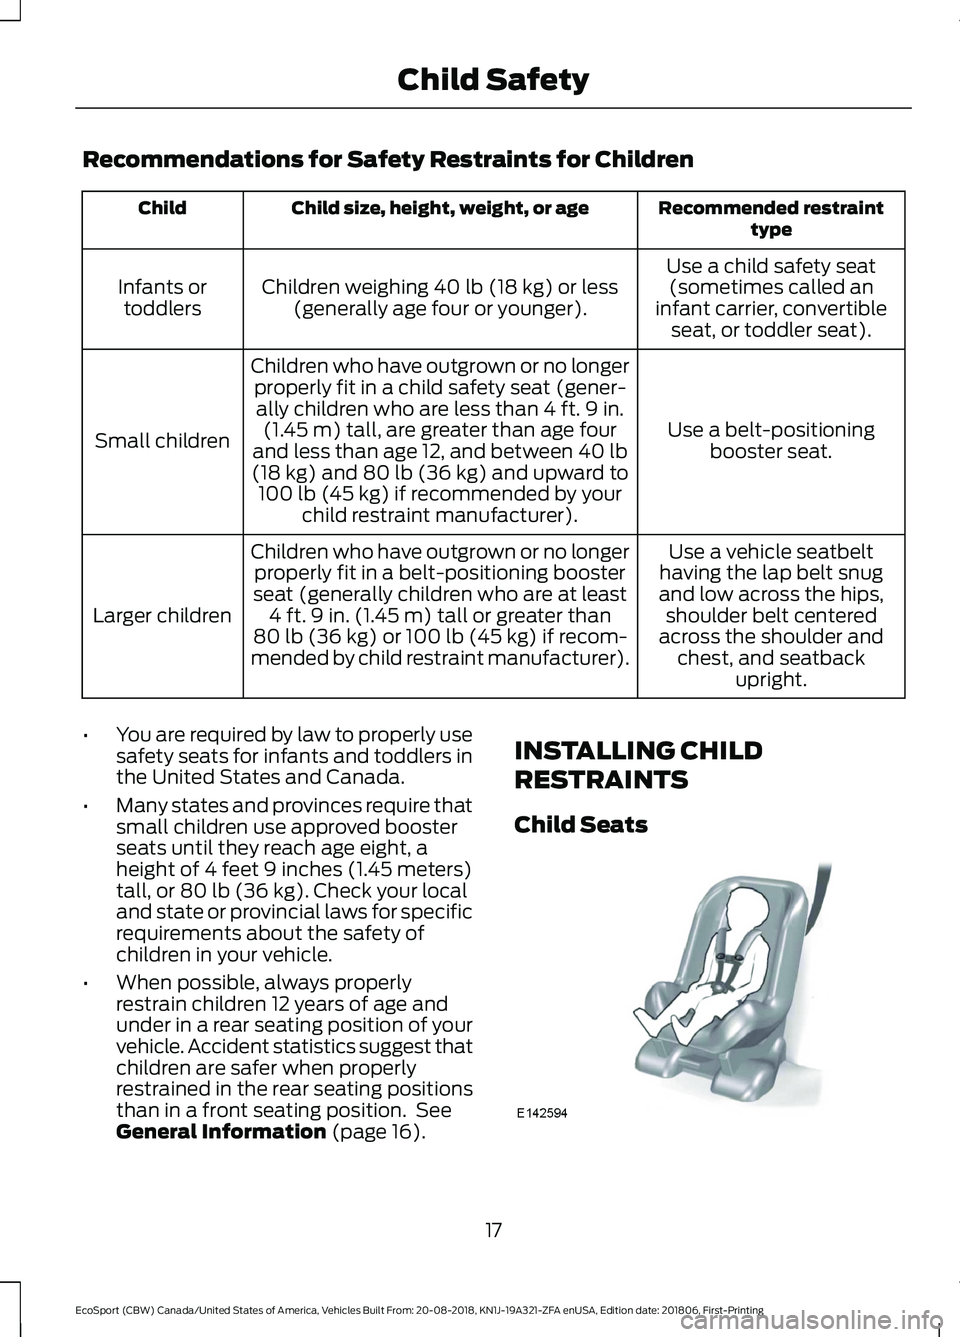 FORD ECOSPORT 2019  Owners Manual Recommendations for Safety Restraints for Children
Recommended restrainttypeChild size, height, weight, or ageChild
Use a child safety seat(sometimes called aninfant carrier, convertibleseat, or toddl